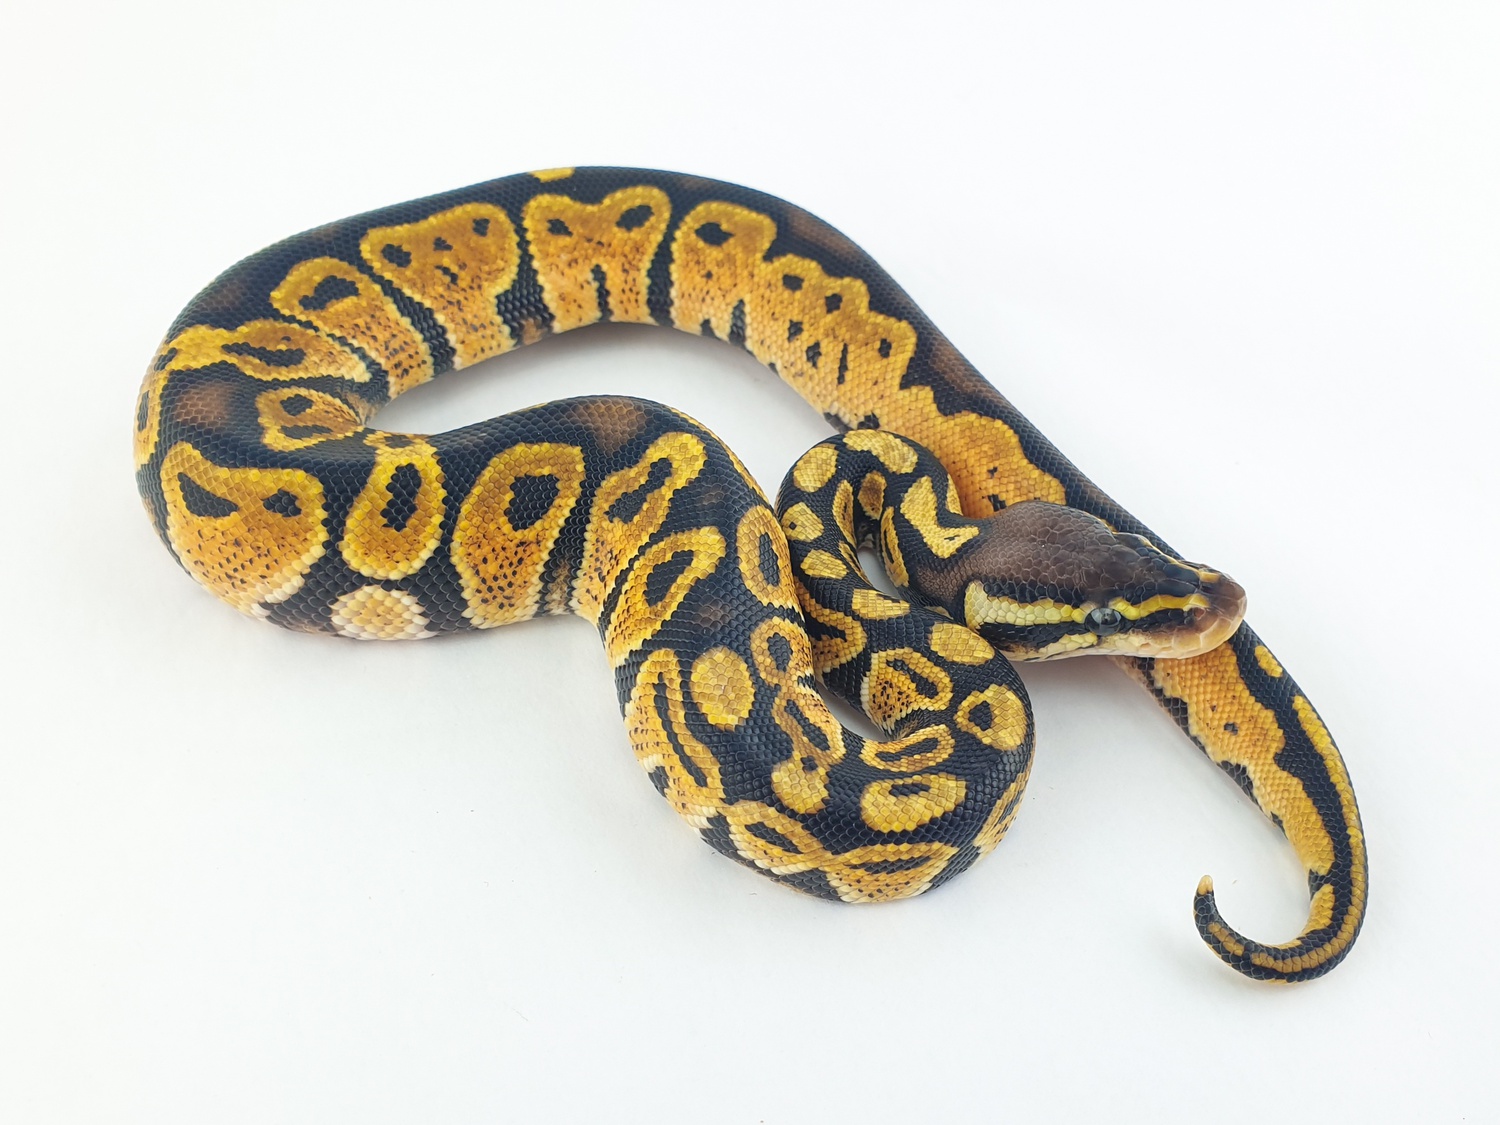 Gravel Pastel Ball Python by Cold Blooded Arts